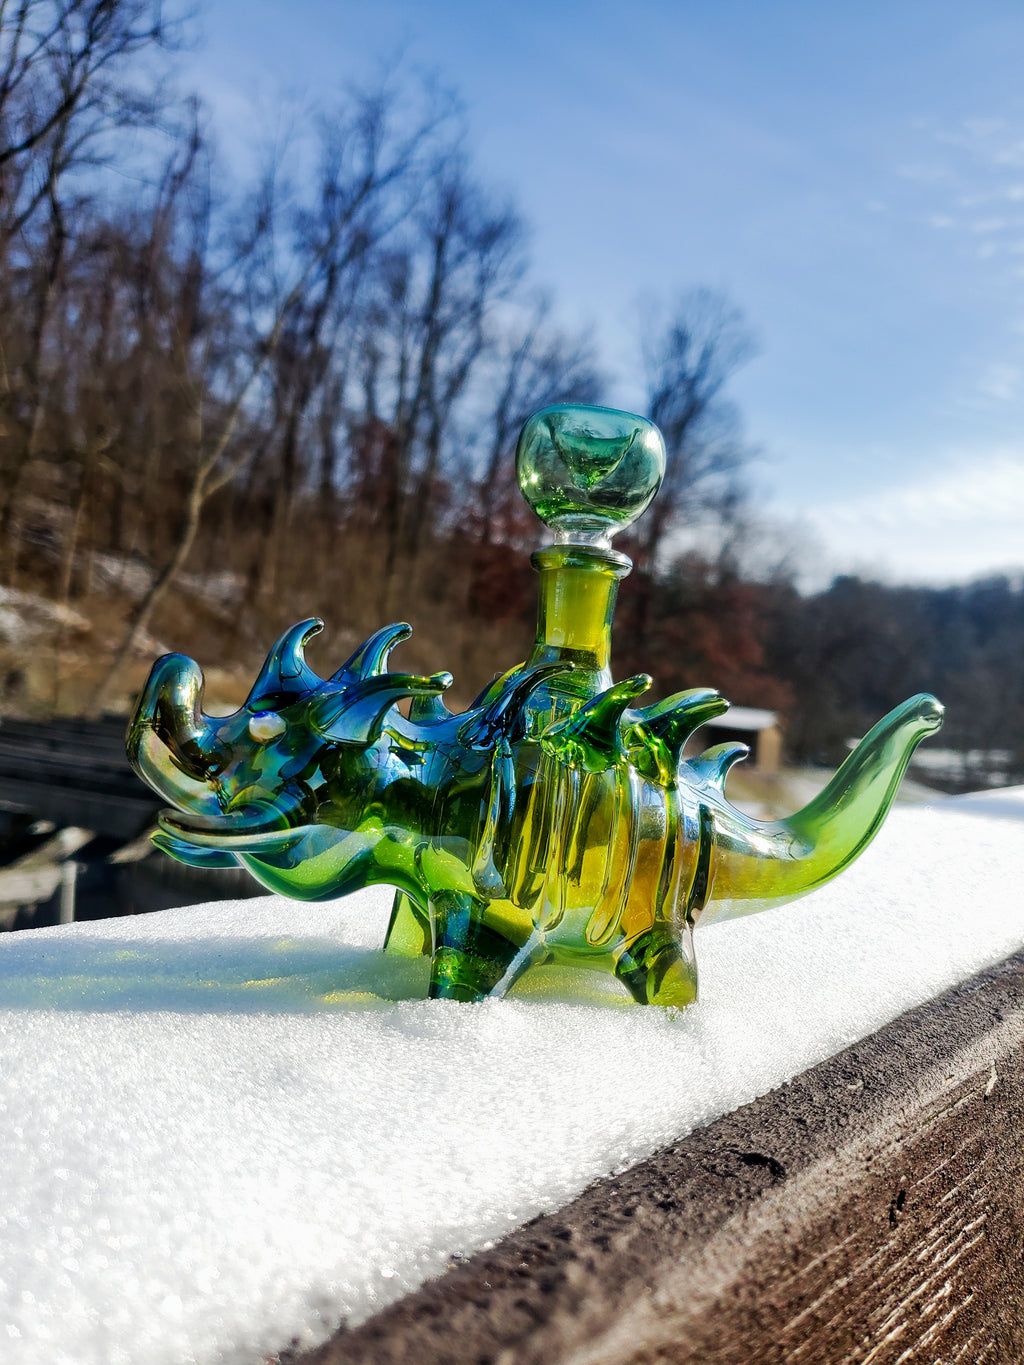 Dino Water Pipe